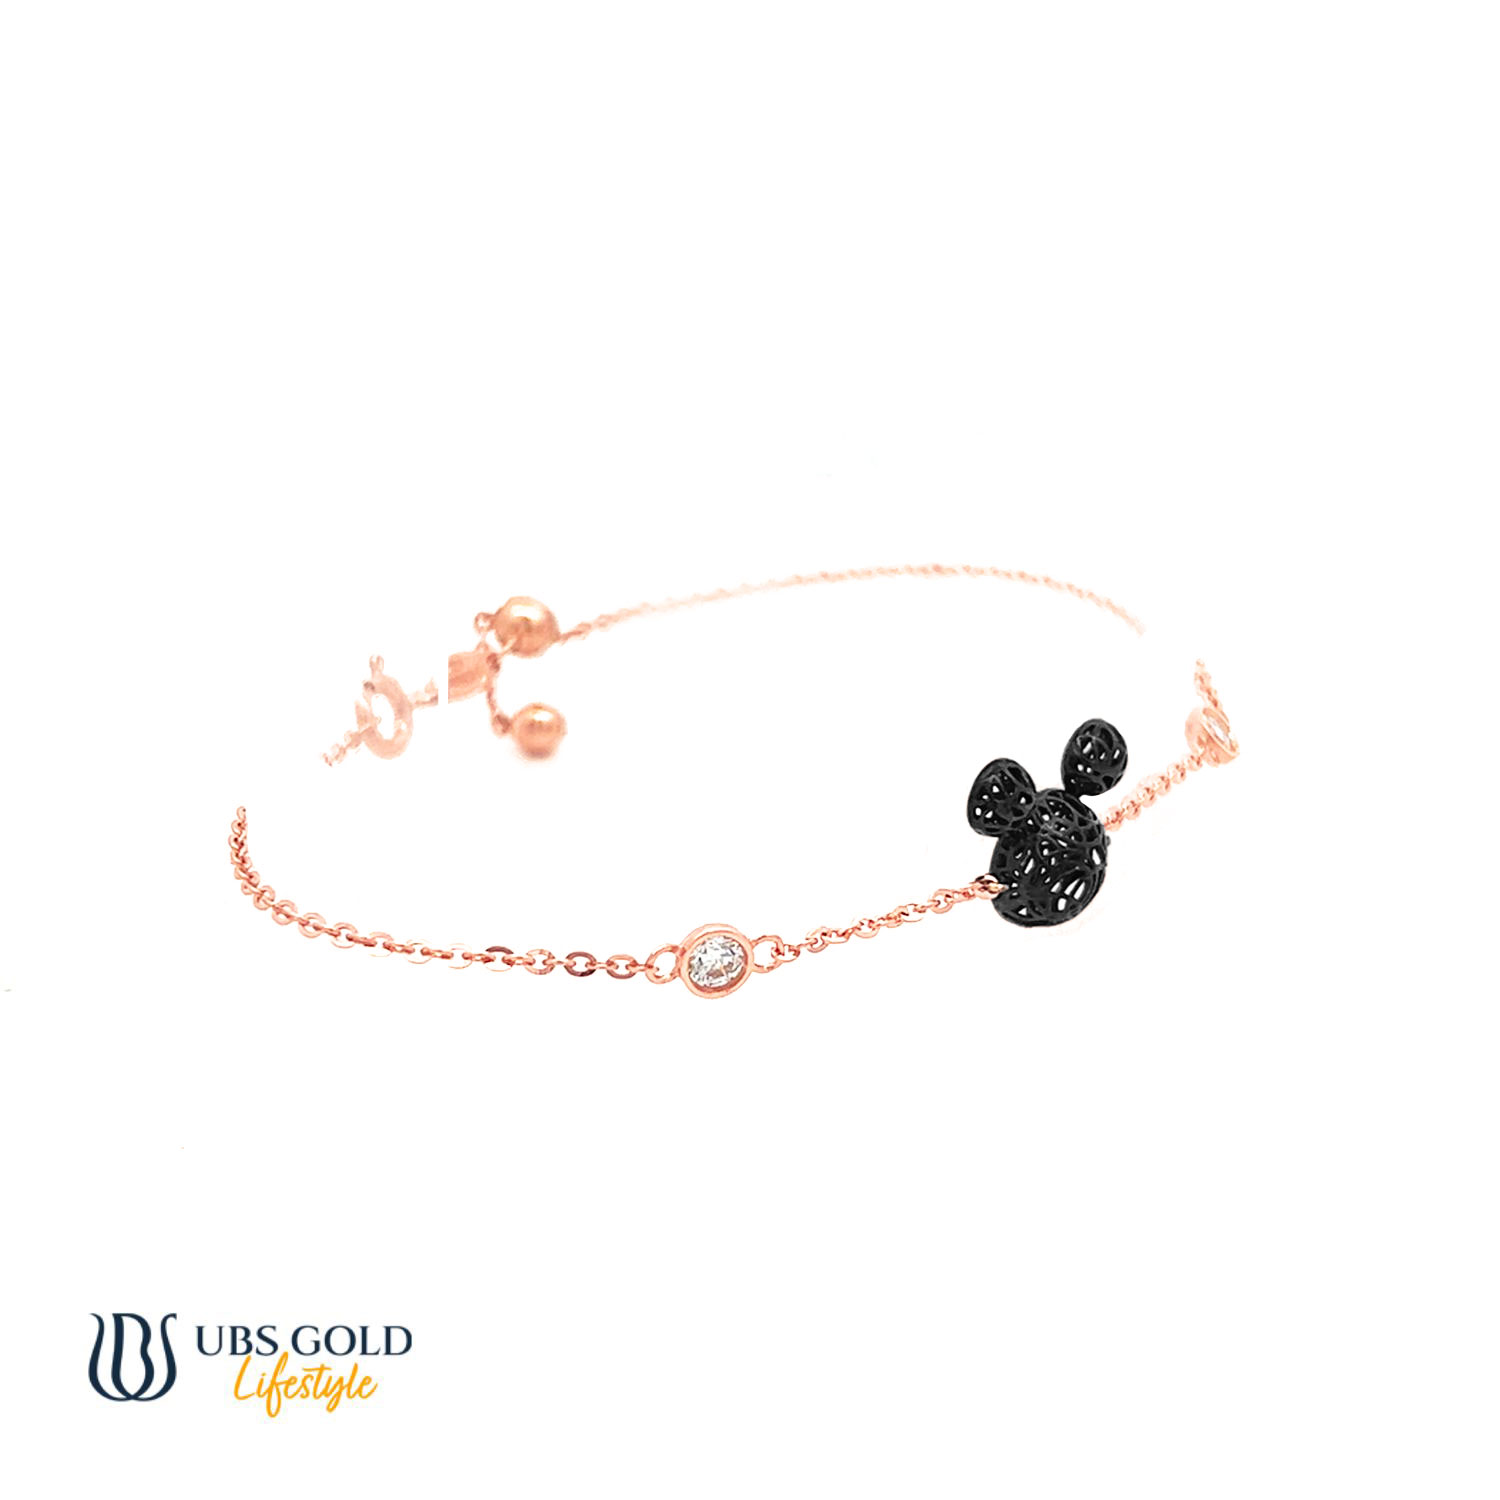 UBS Gold Gelang Emas Disney Mickey Mouse - Kgy0103 - 17K